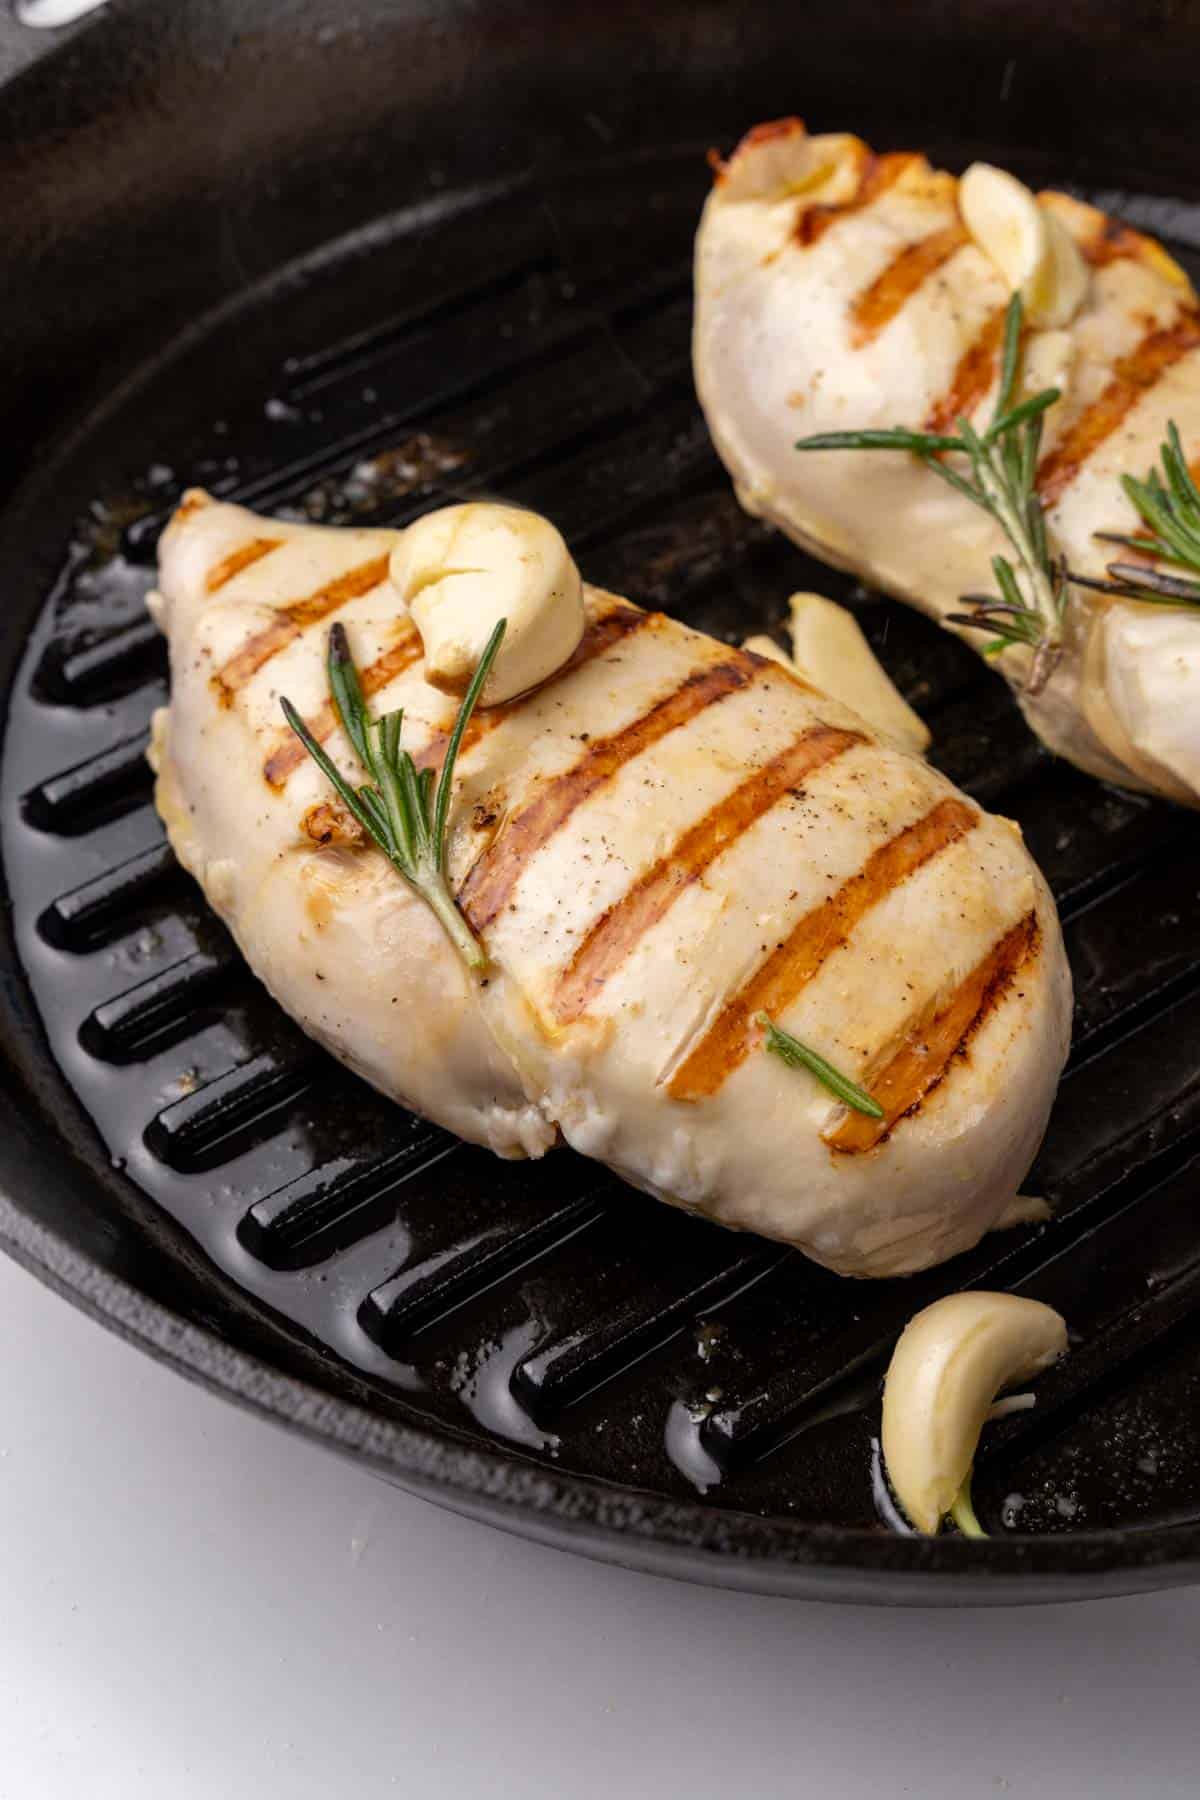 Side view of chicken breasts with grill marks in the black grill pan with rosemary sprigs and garlic cloves on top